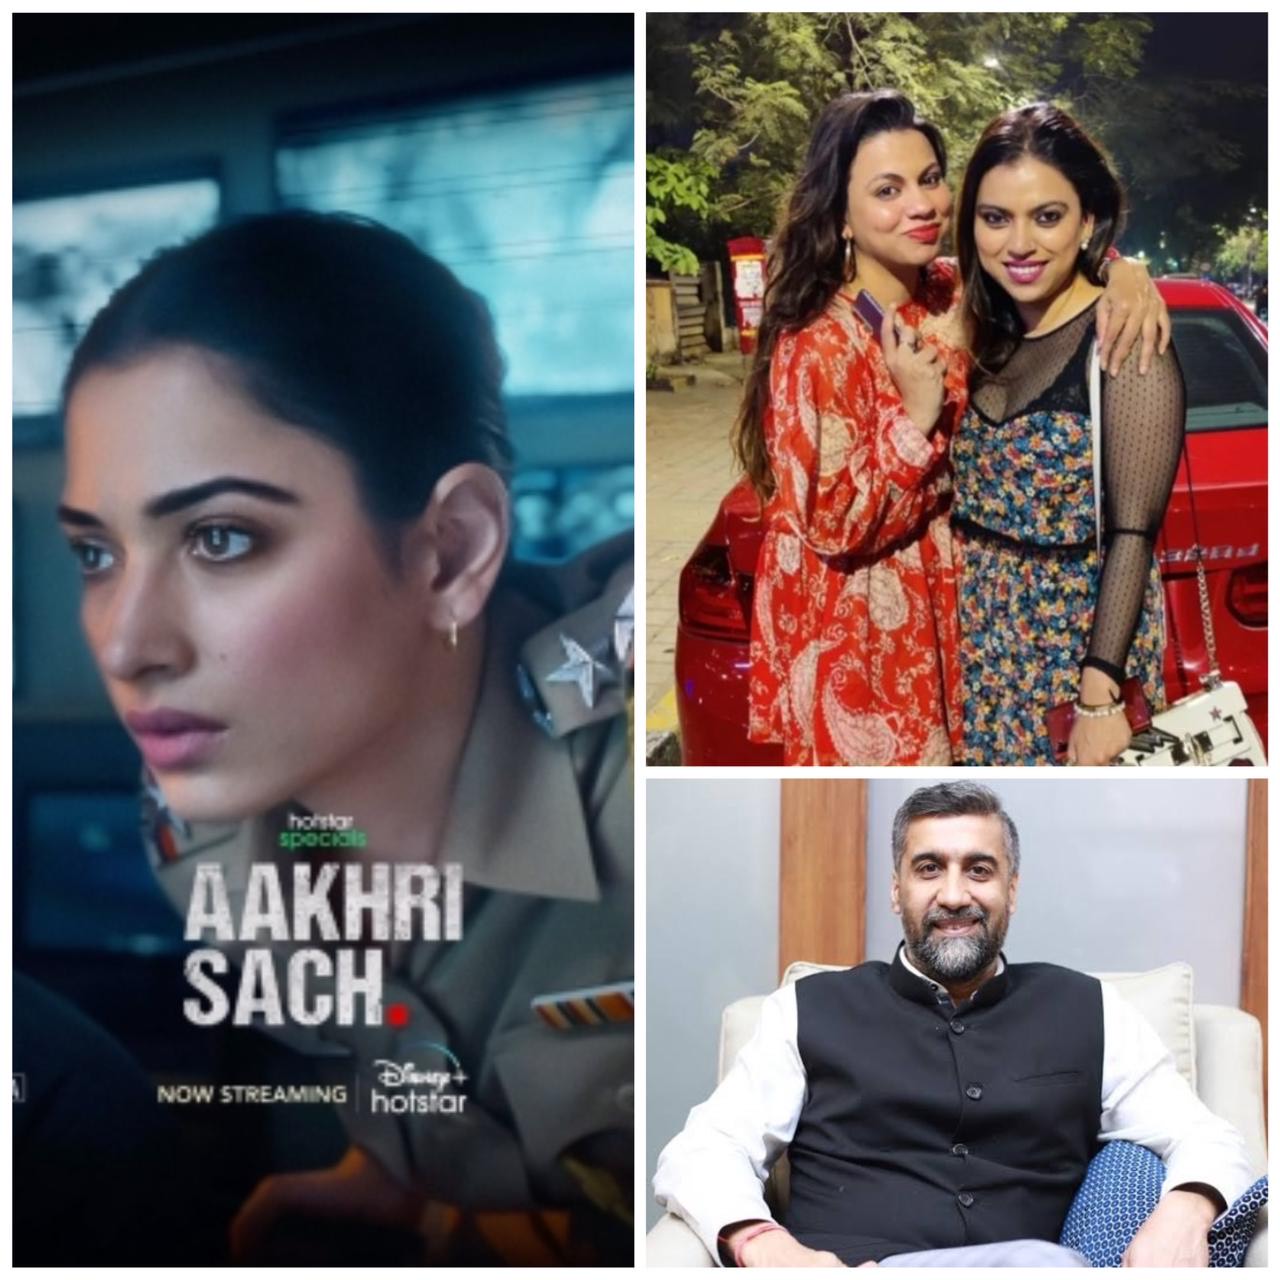 Producers Preeti Simoes and Neeti Simoes along with other team members of series ‘Aakhri Sach’ starring Tammanaah Bhatia file case against co-producer Nikhil Nanda for non-disclosure of accounts and non-payment of dues